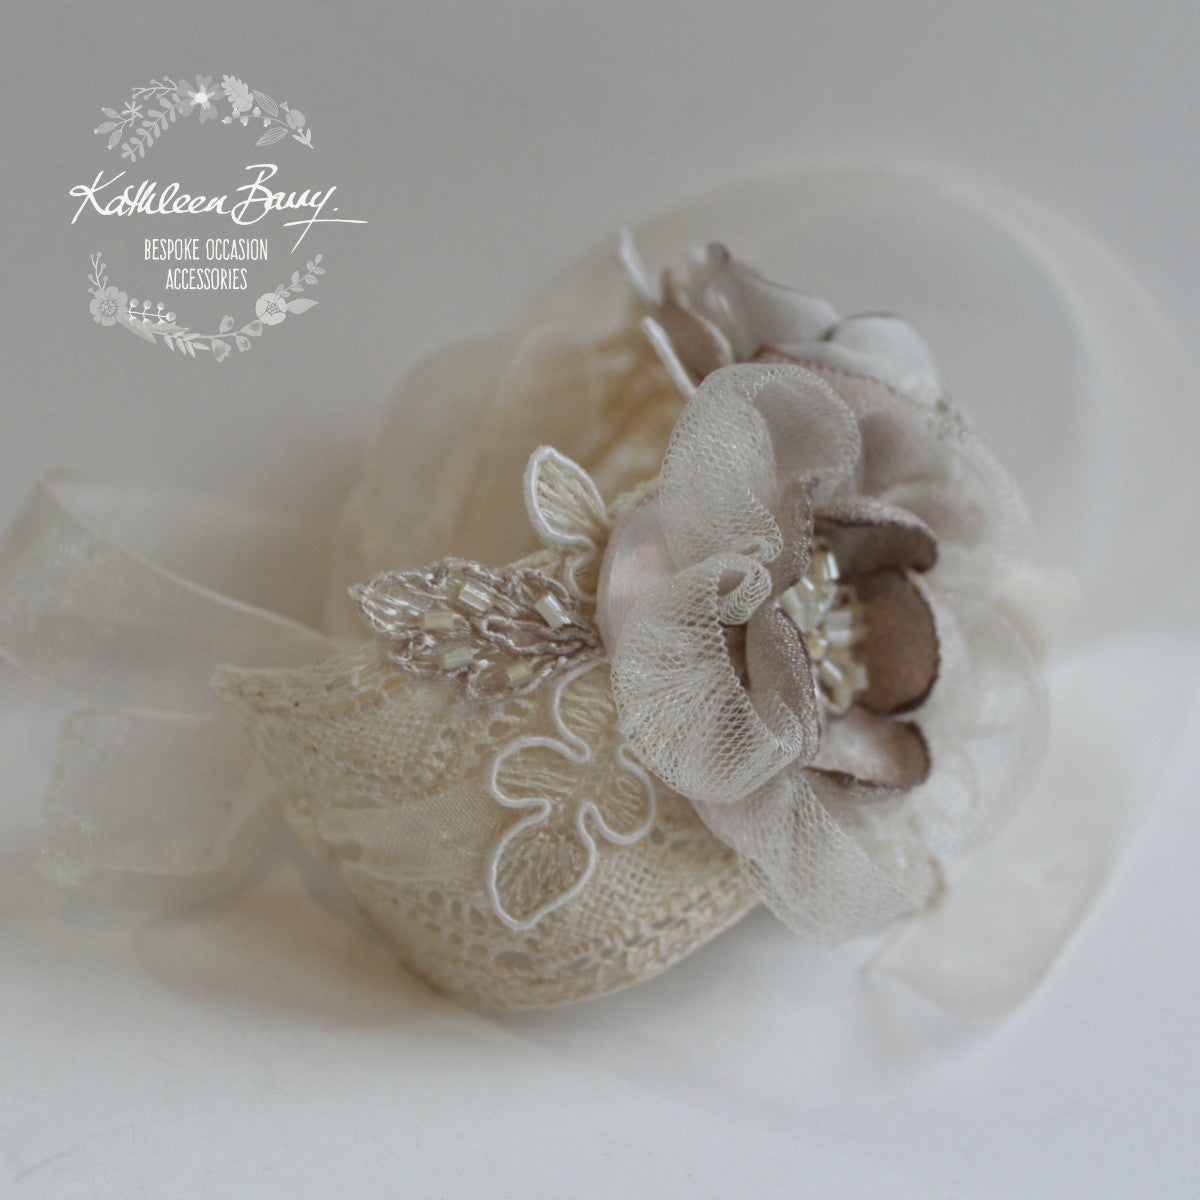 Lace wrist corsage - Oyster taupe pebble wedding accessories - Mother of the Bride - Bridesmaid - Prom - Matric dance